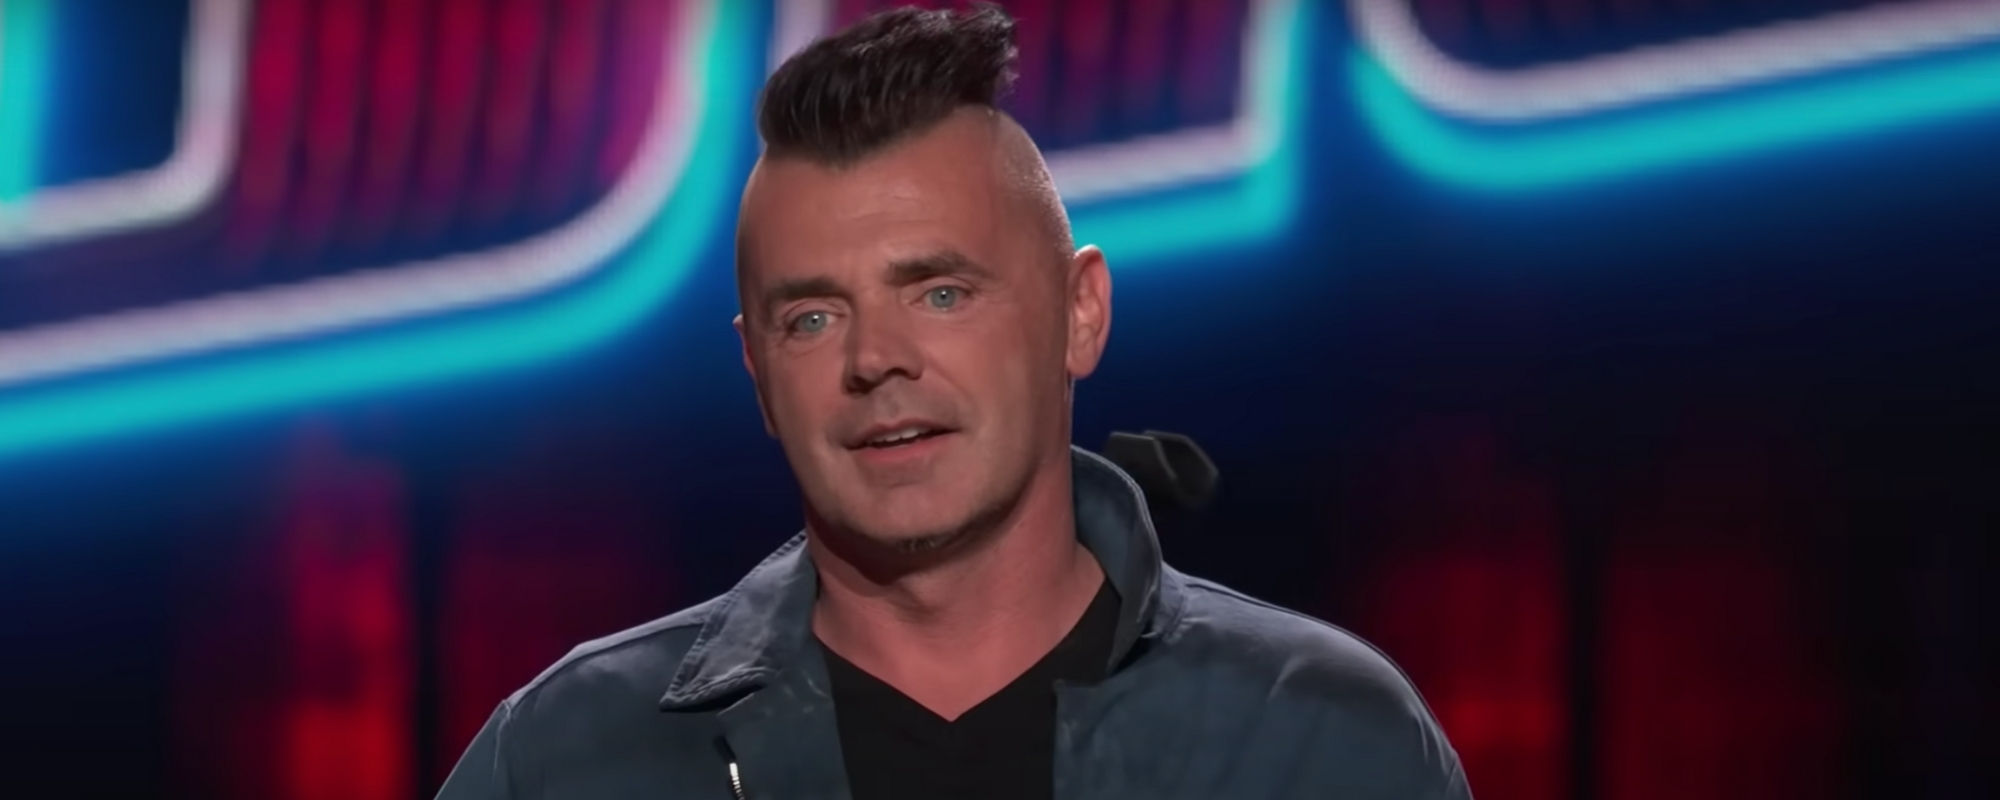 The Story Behind ‘The Voice’ Star Bryan Olesen’s Departure from the Christian Rock Band Newsboys